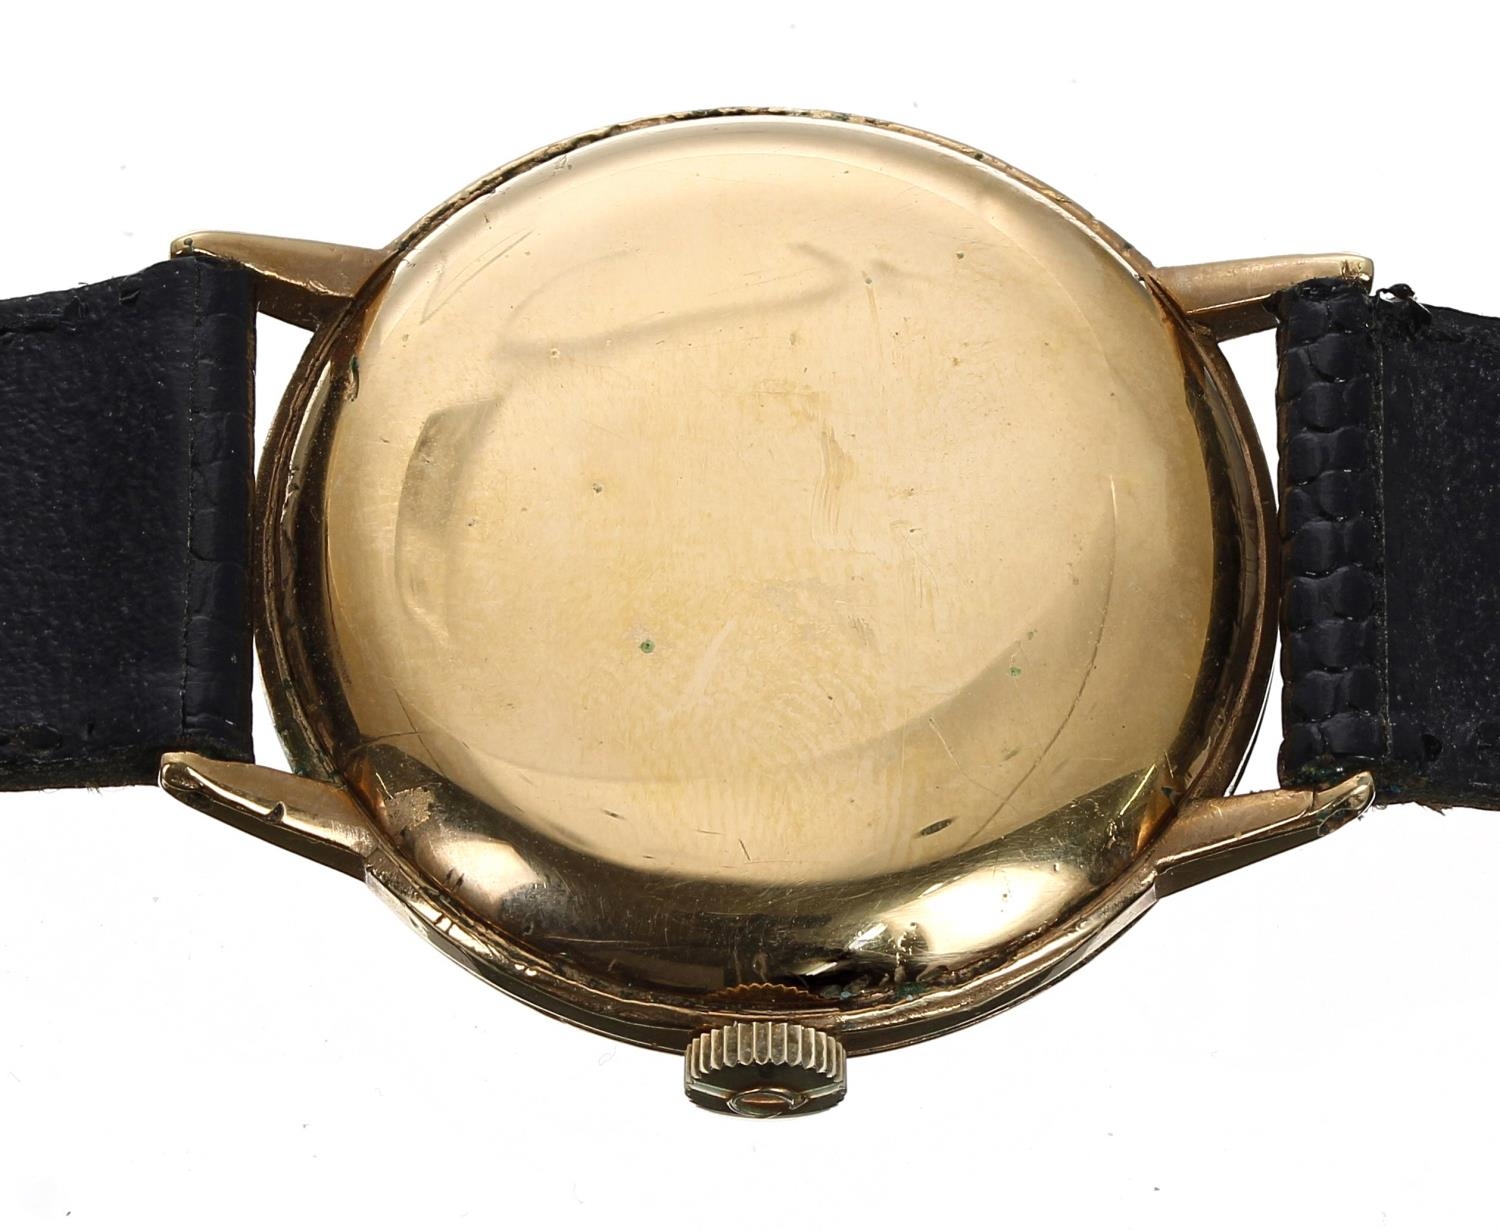 Omega gold plated gentleman's wristwatch, case no. 10477575, serial no. 9952xxx, circa 1940's, - Image 2 of 2